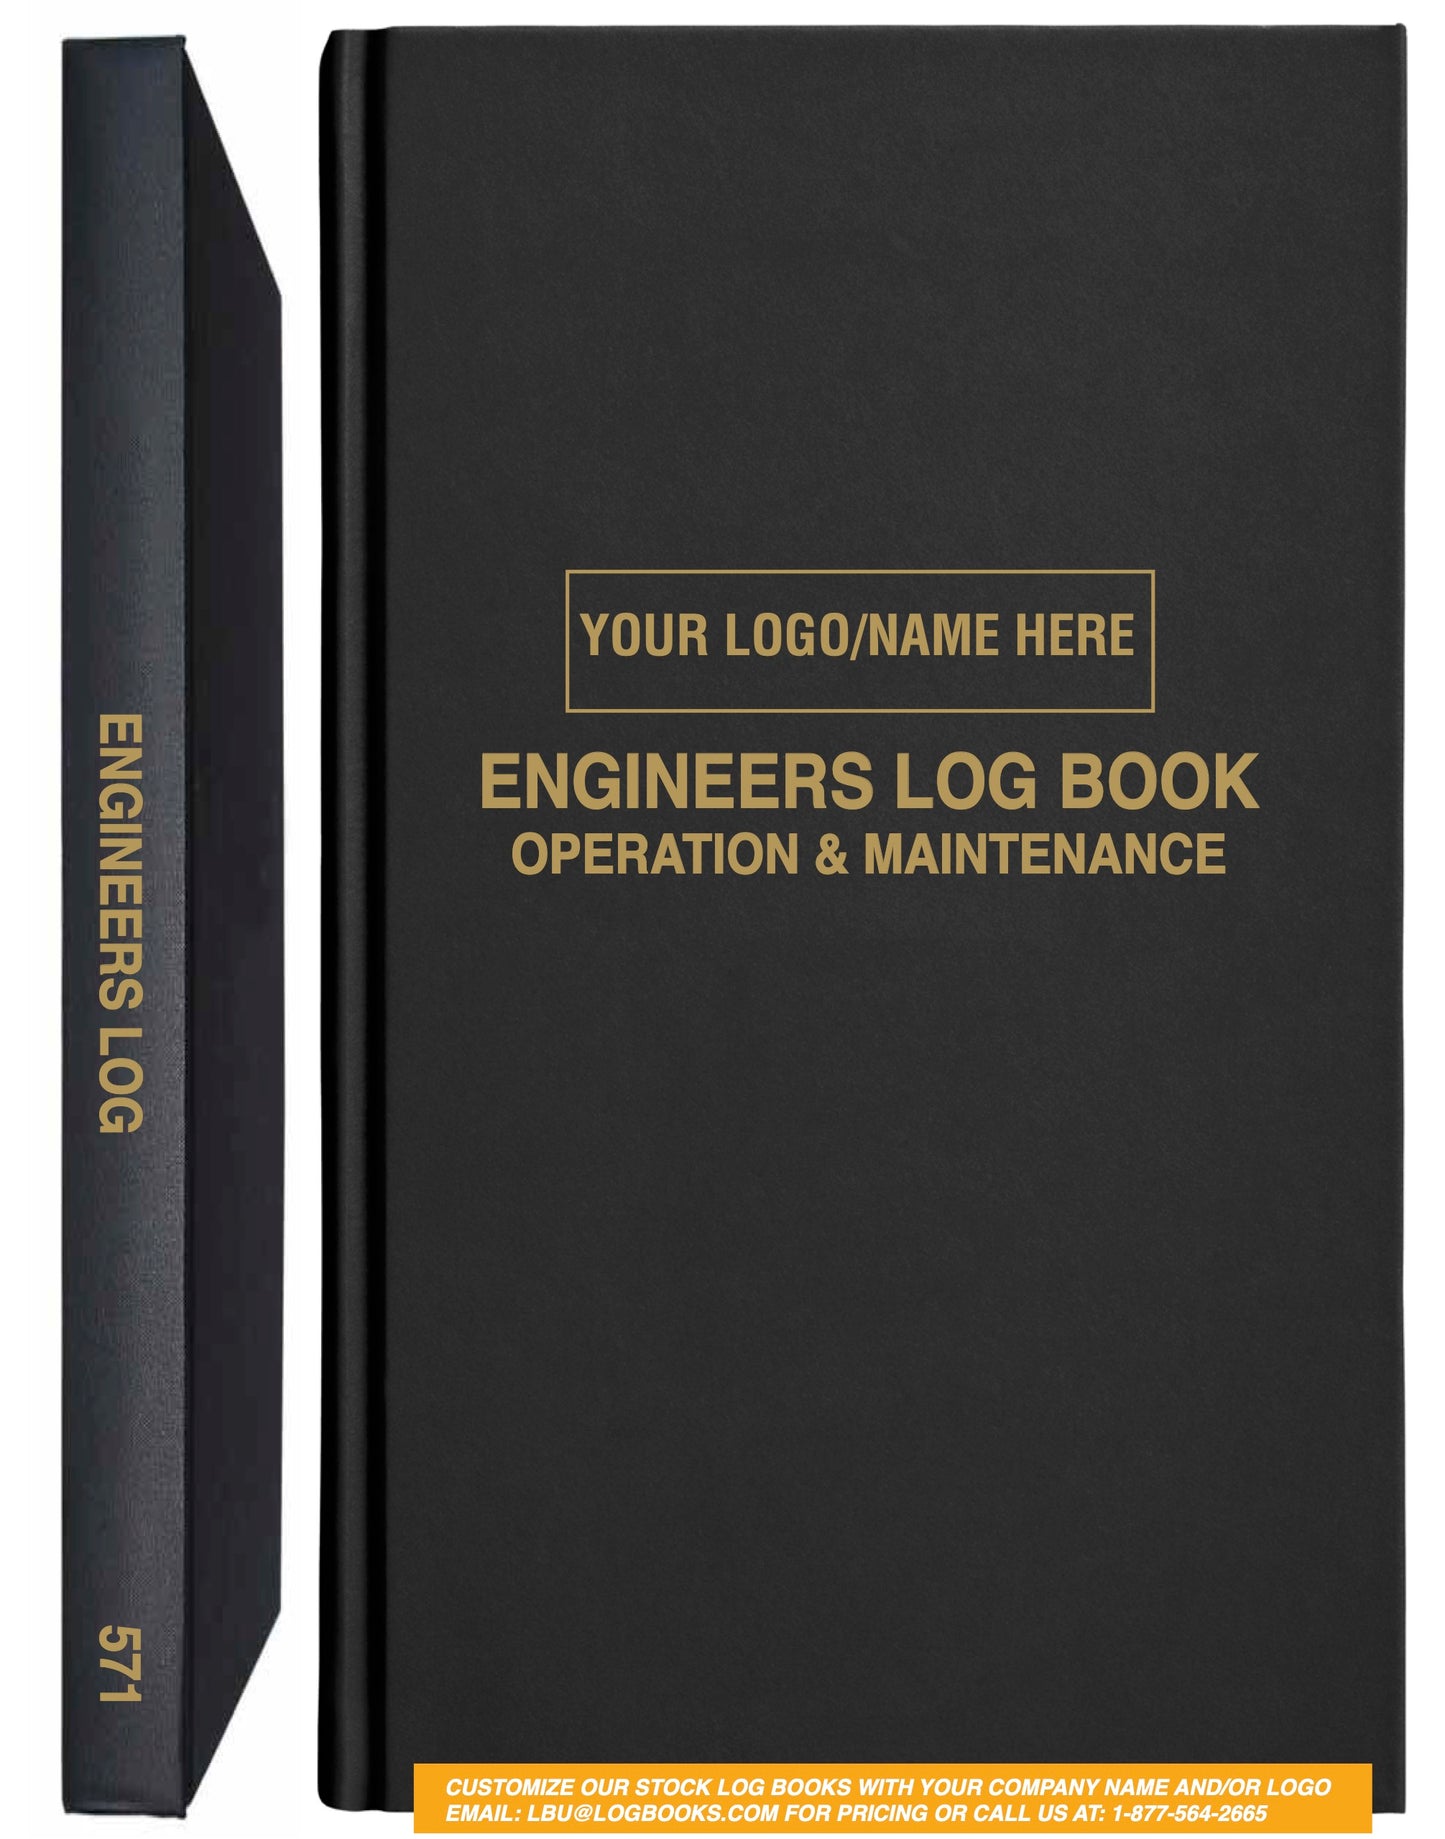 Engineers (1 Shifts per page) Log Book #571